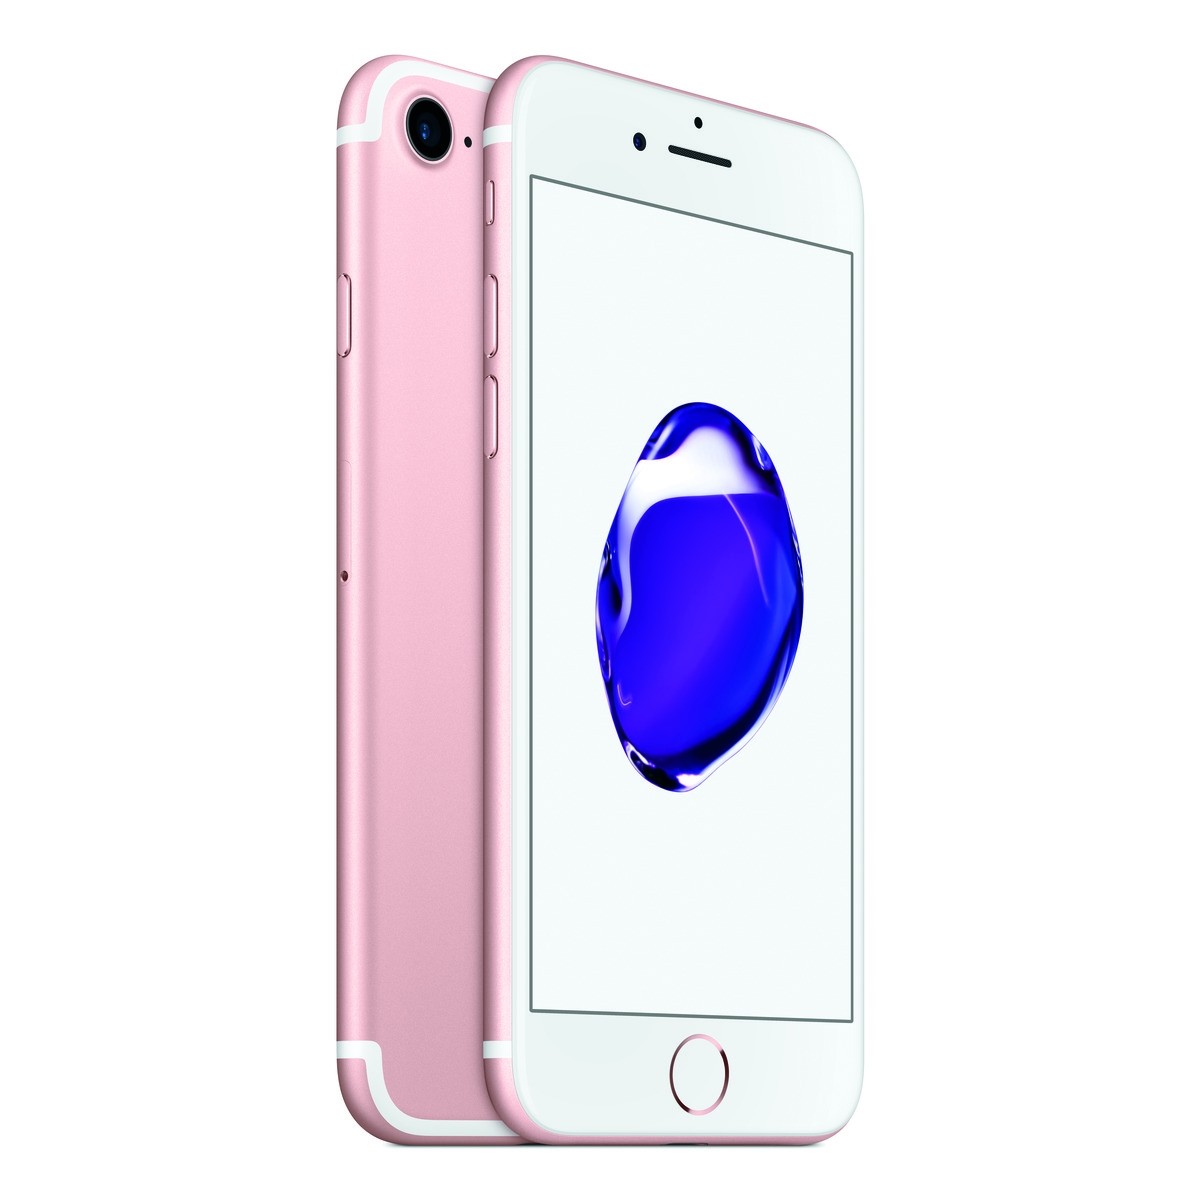 Iphone 7 (Vodacom) Pre-owned